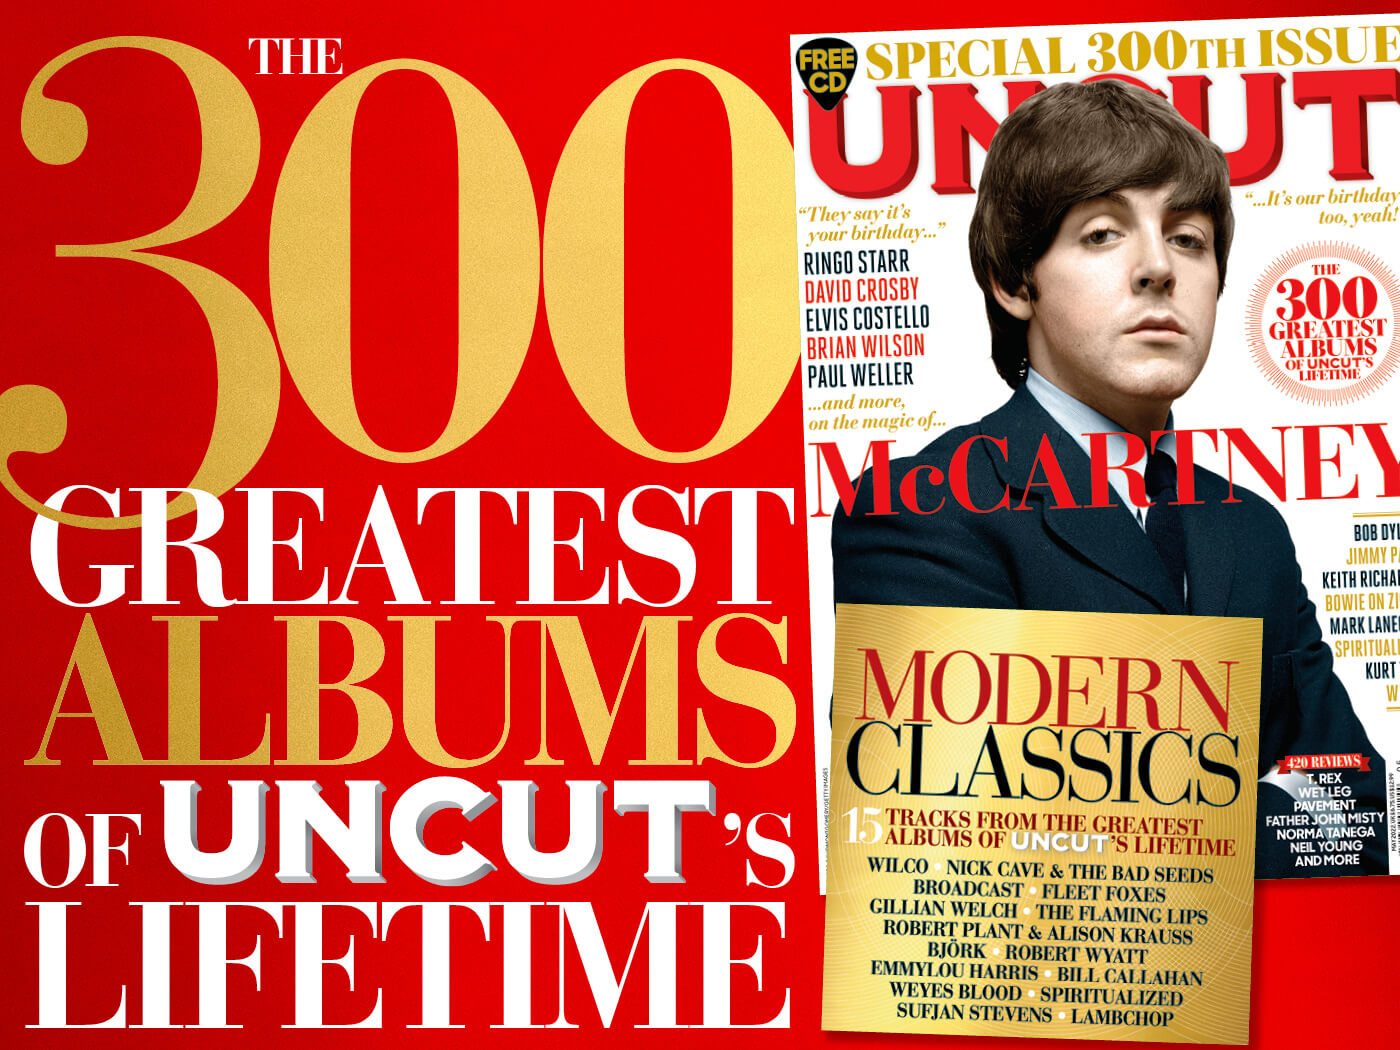 The 300 Greatest Albums in Uncut's Lifetime